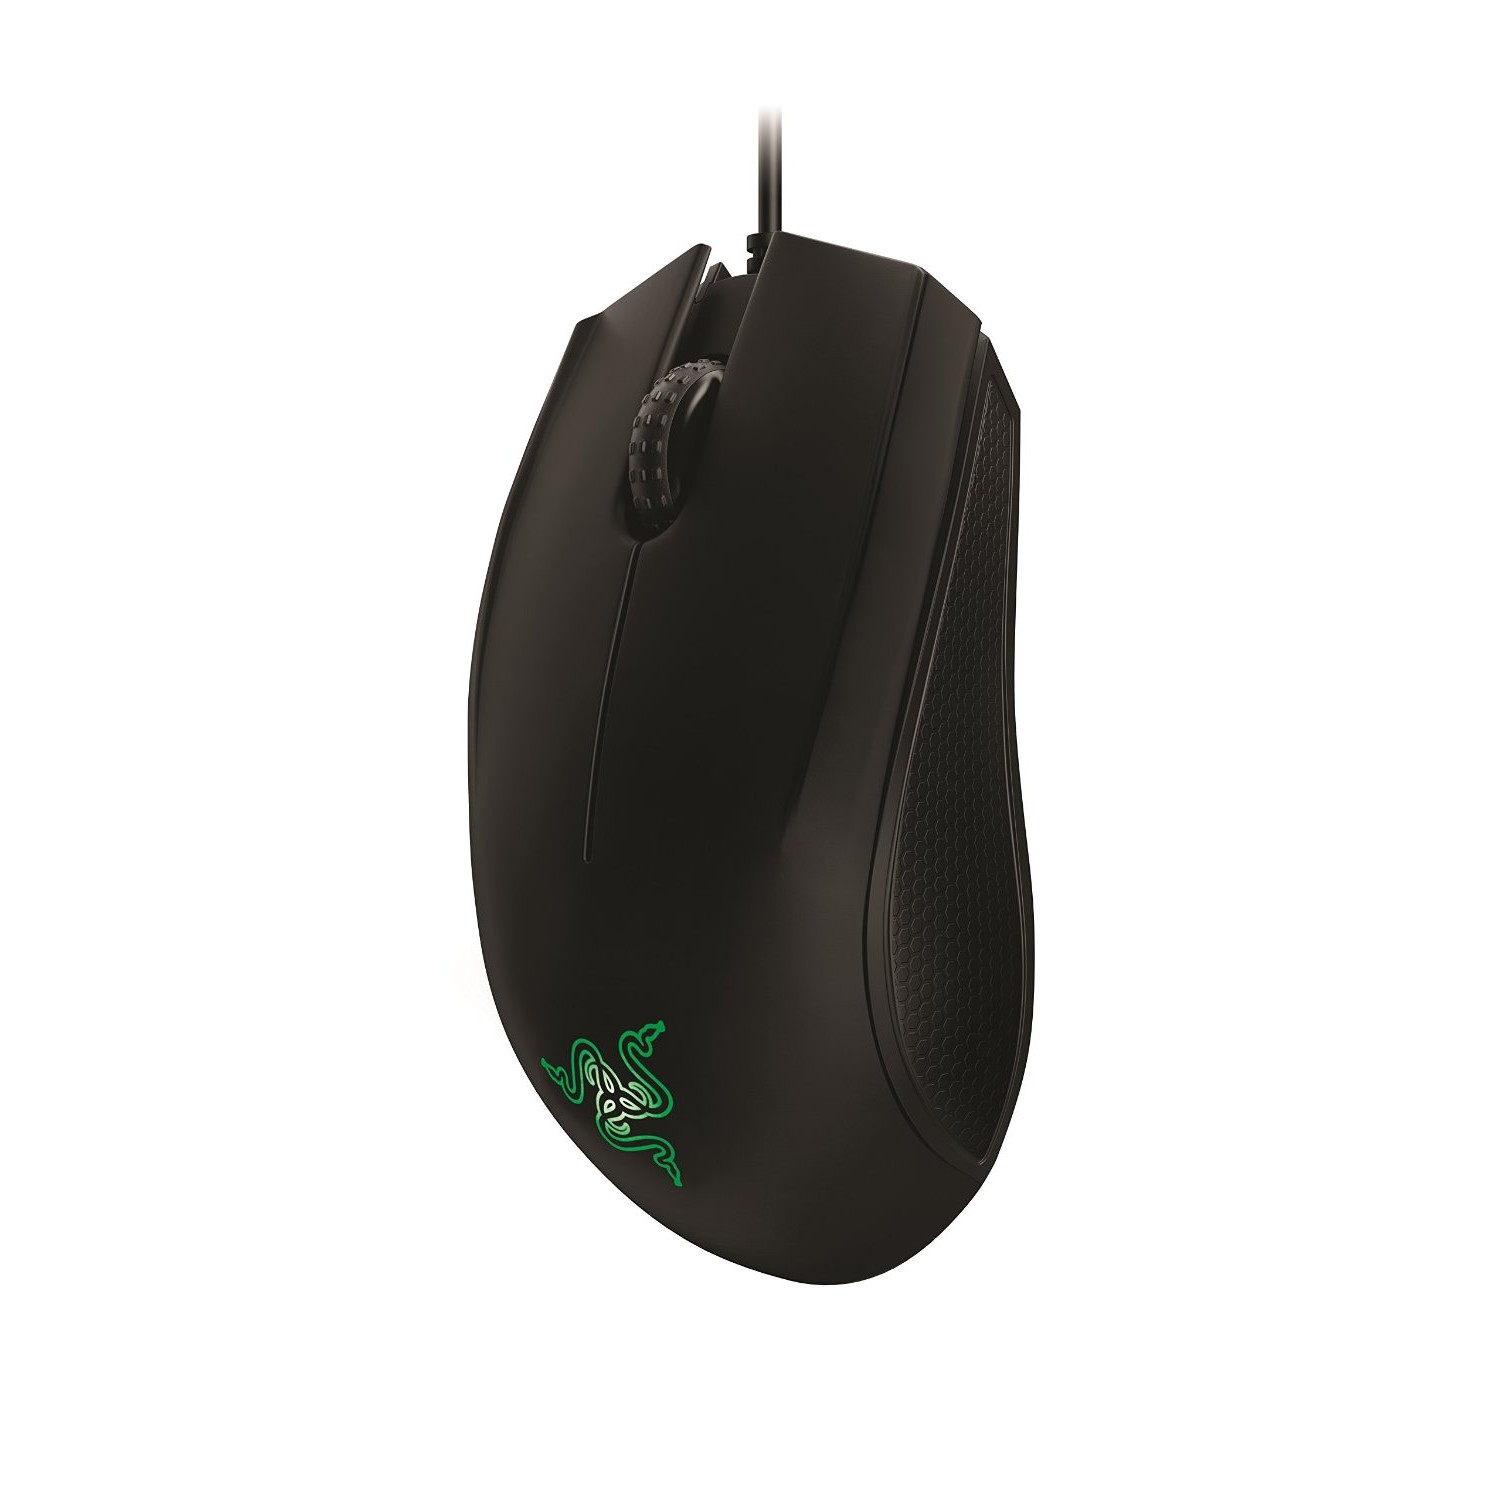 Razer Abyssus Ambidextrous Gaming Mouse-2